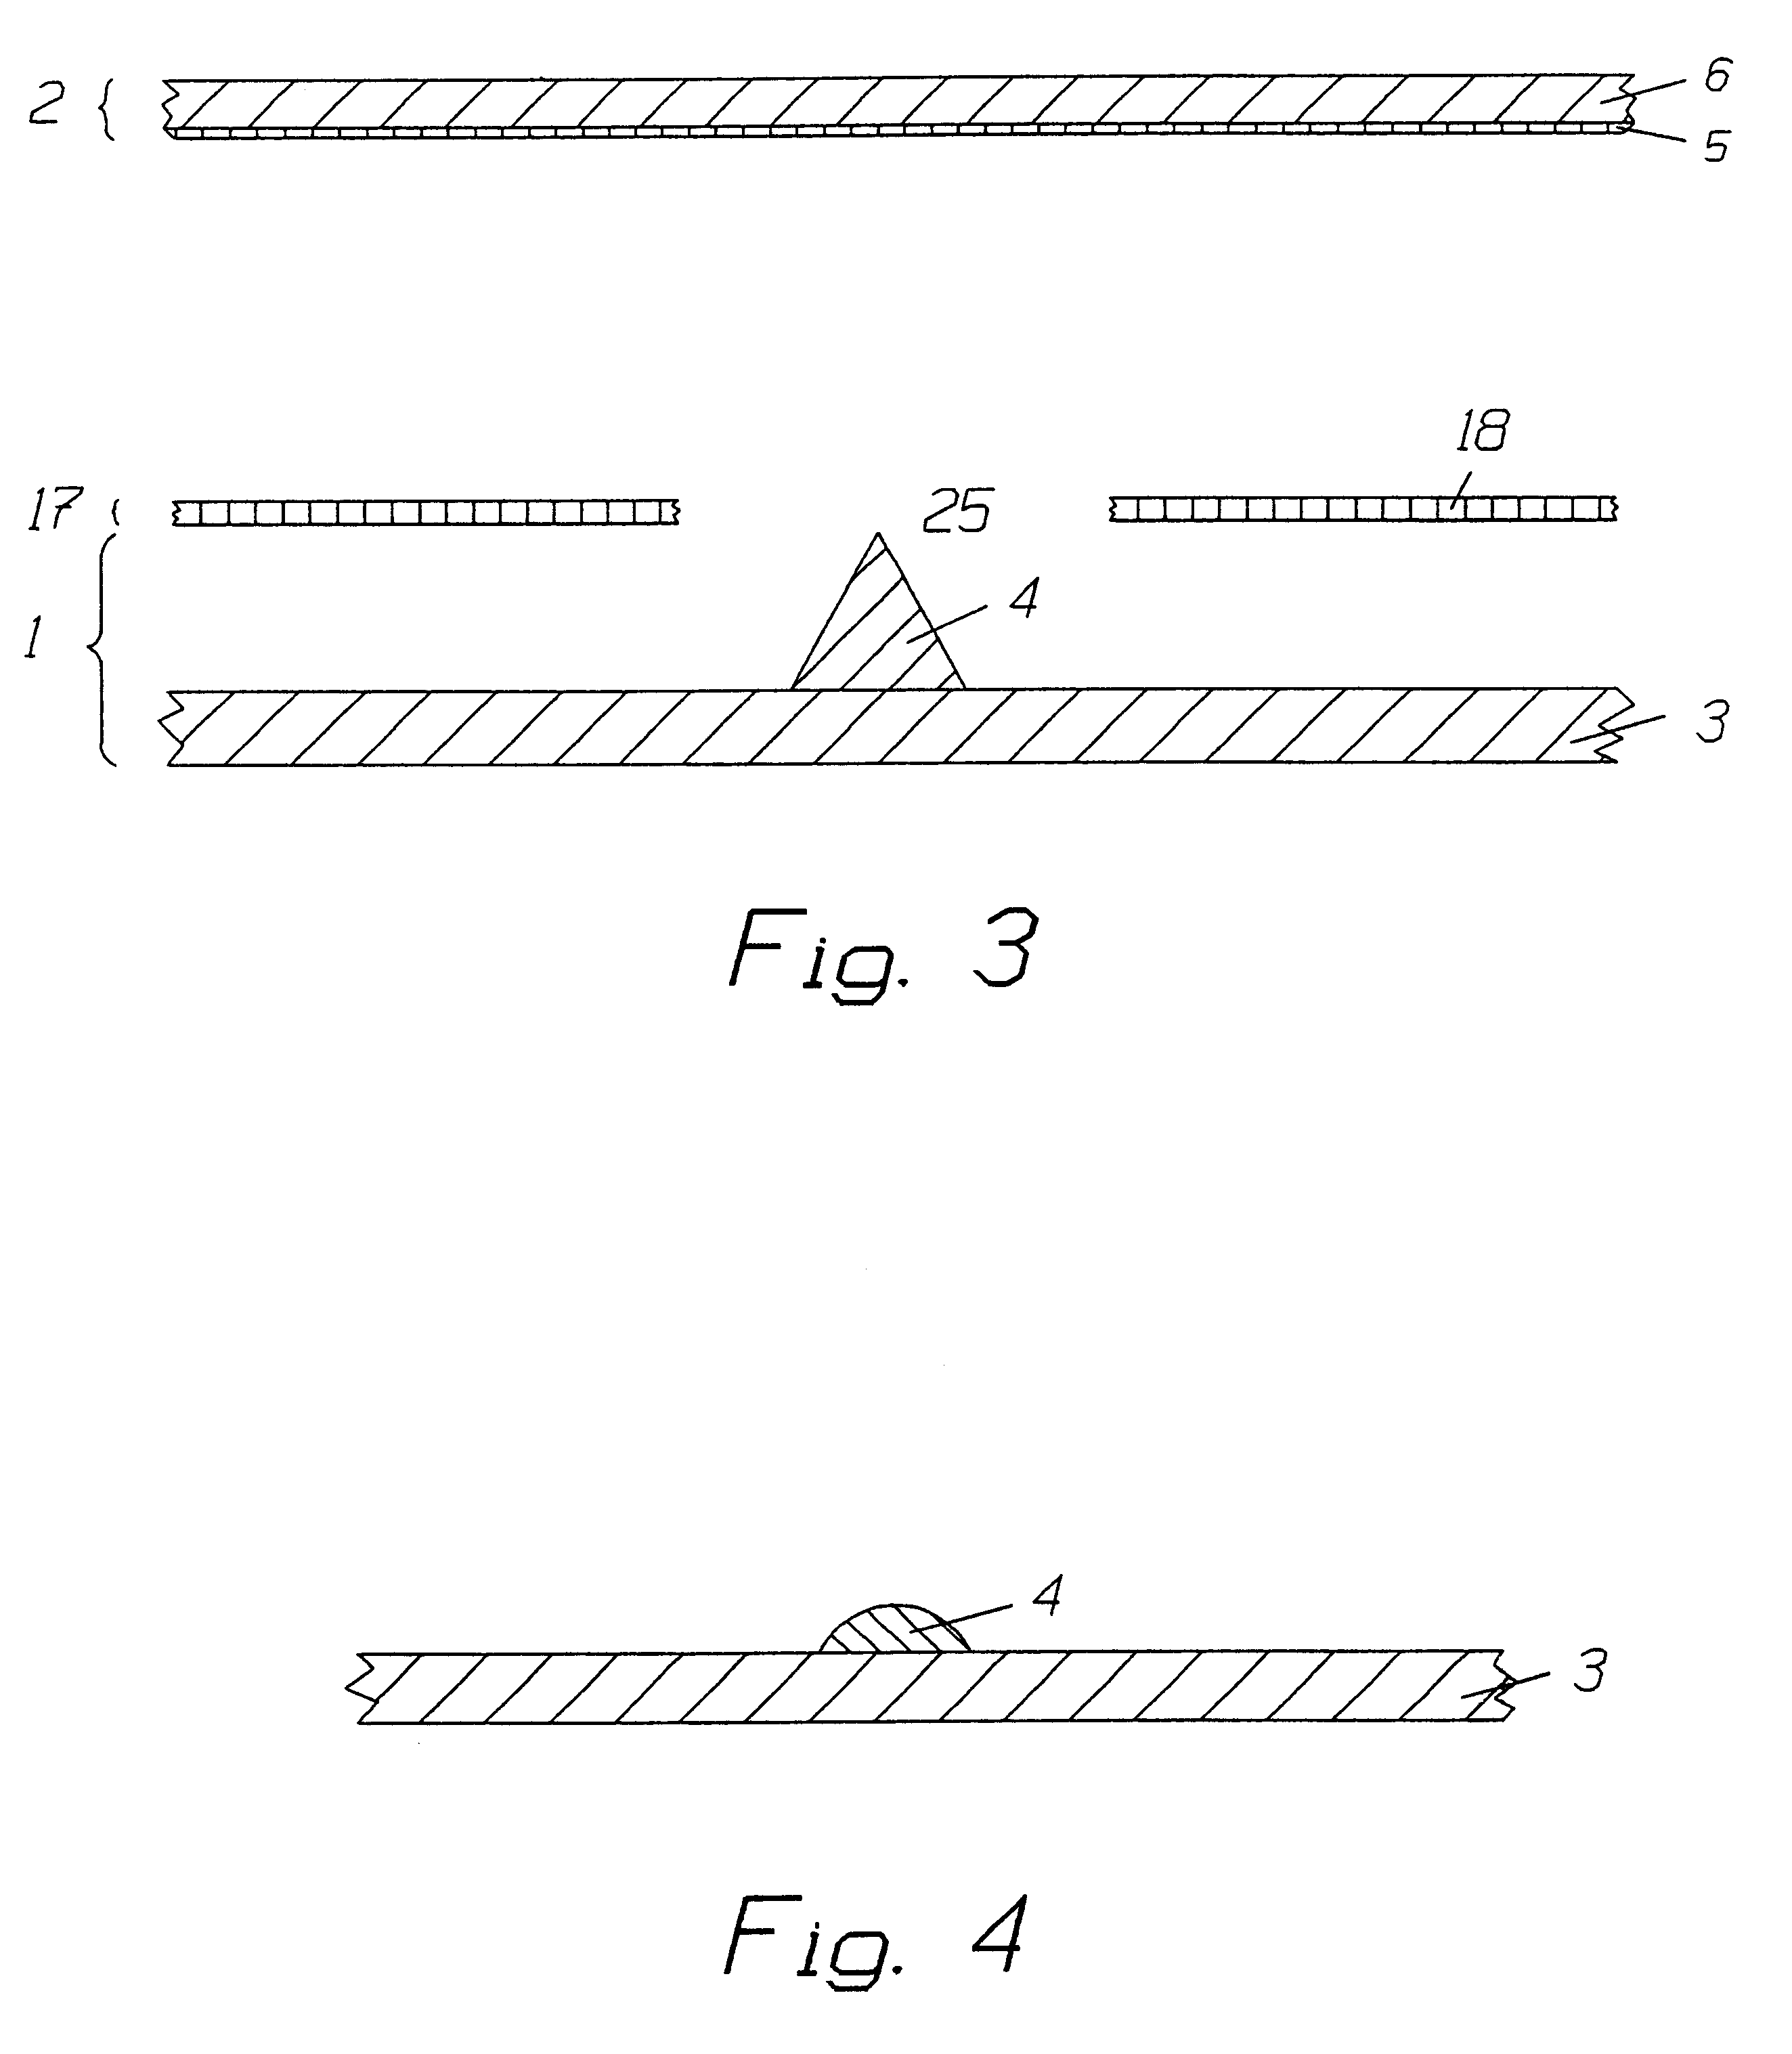 Radiation detector, an apparatus for use in radiography and a method for detecting ionizing radiation